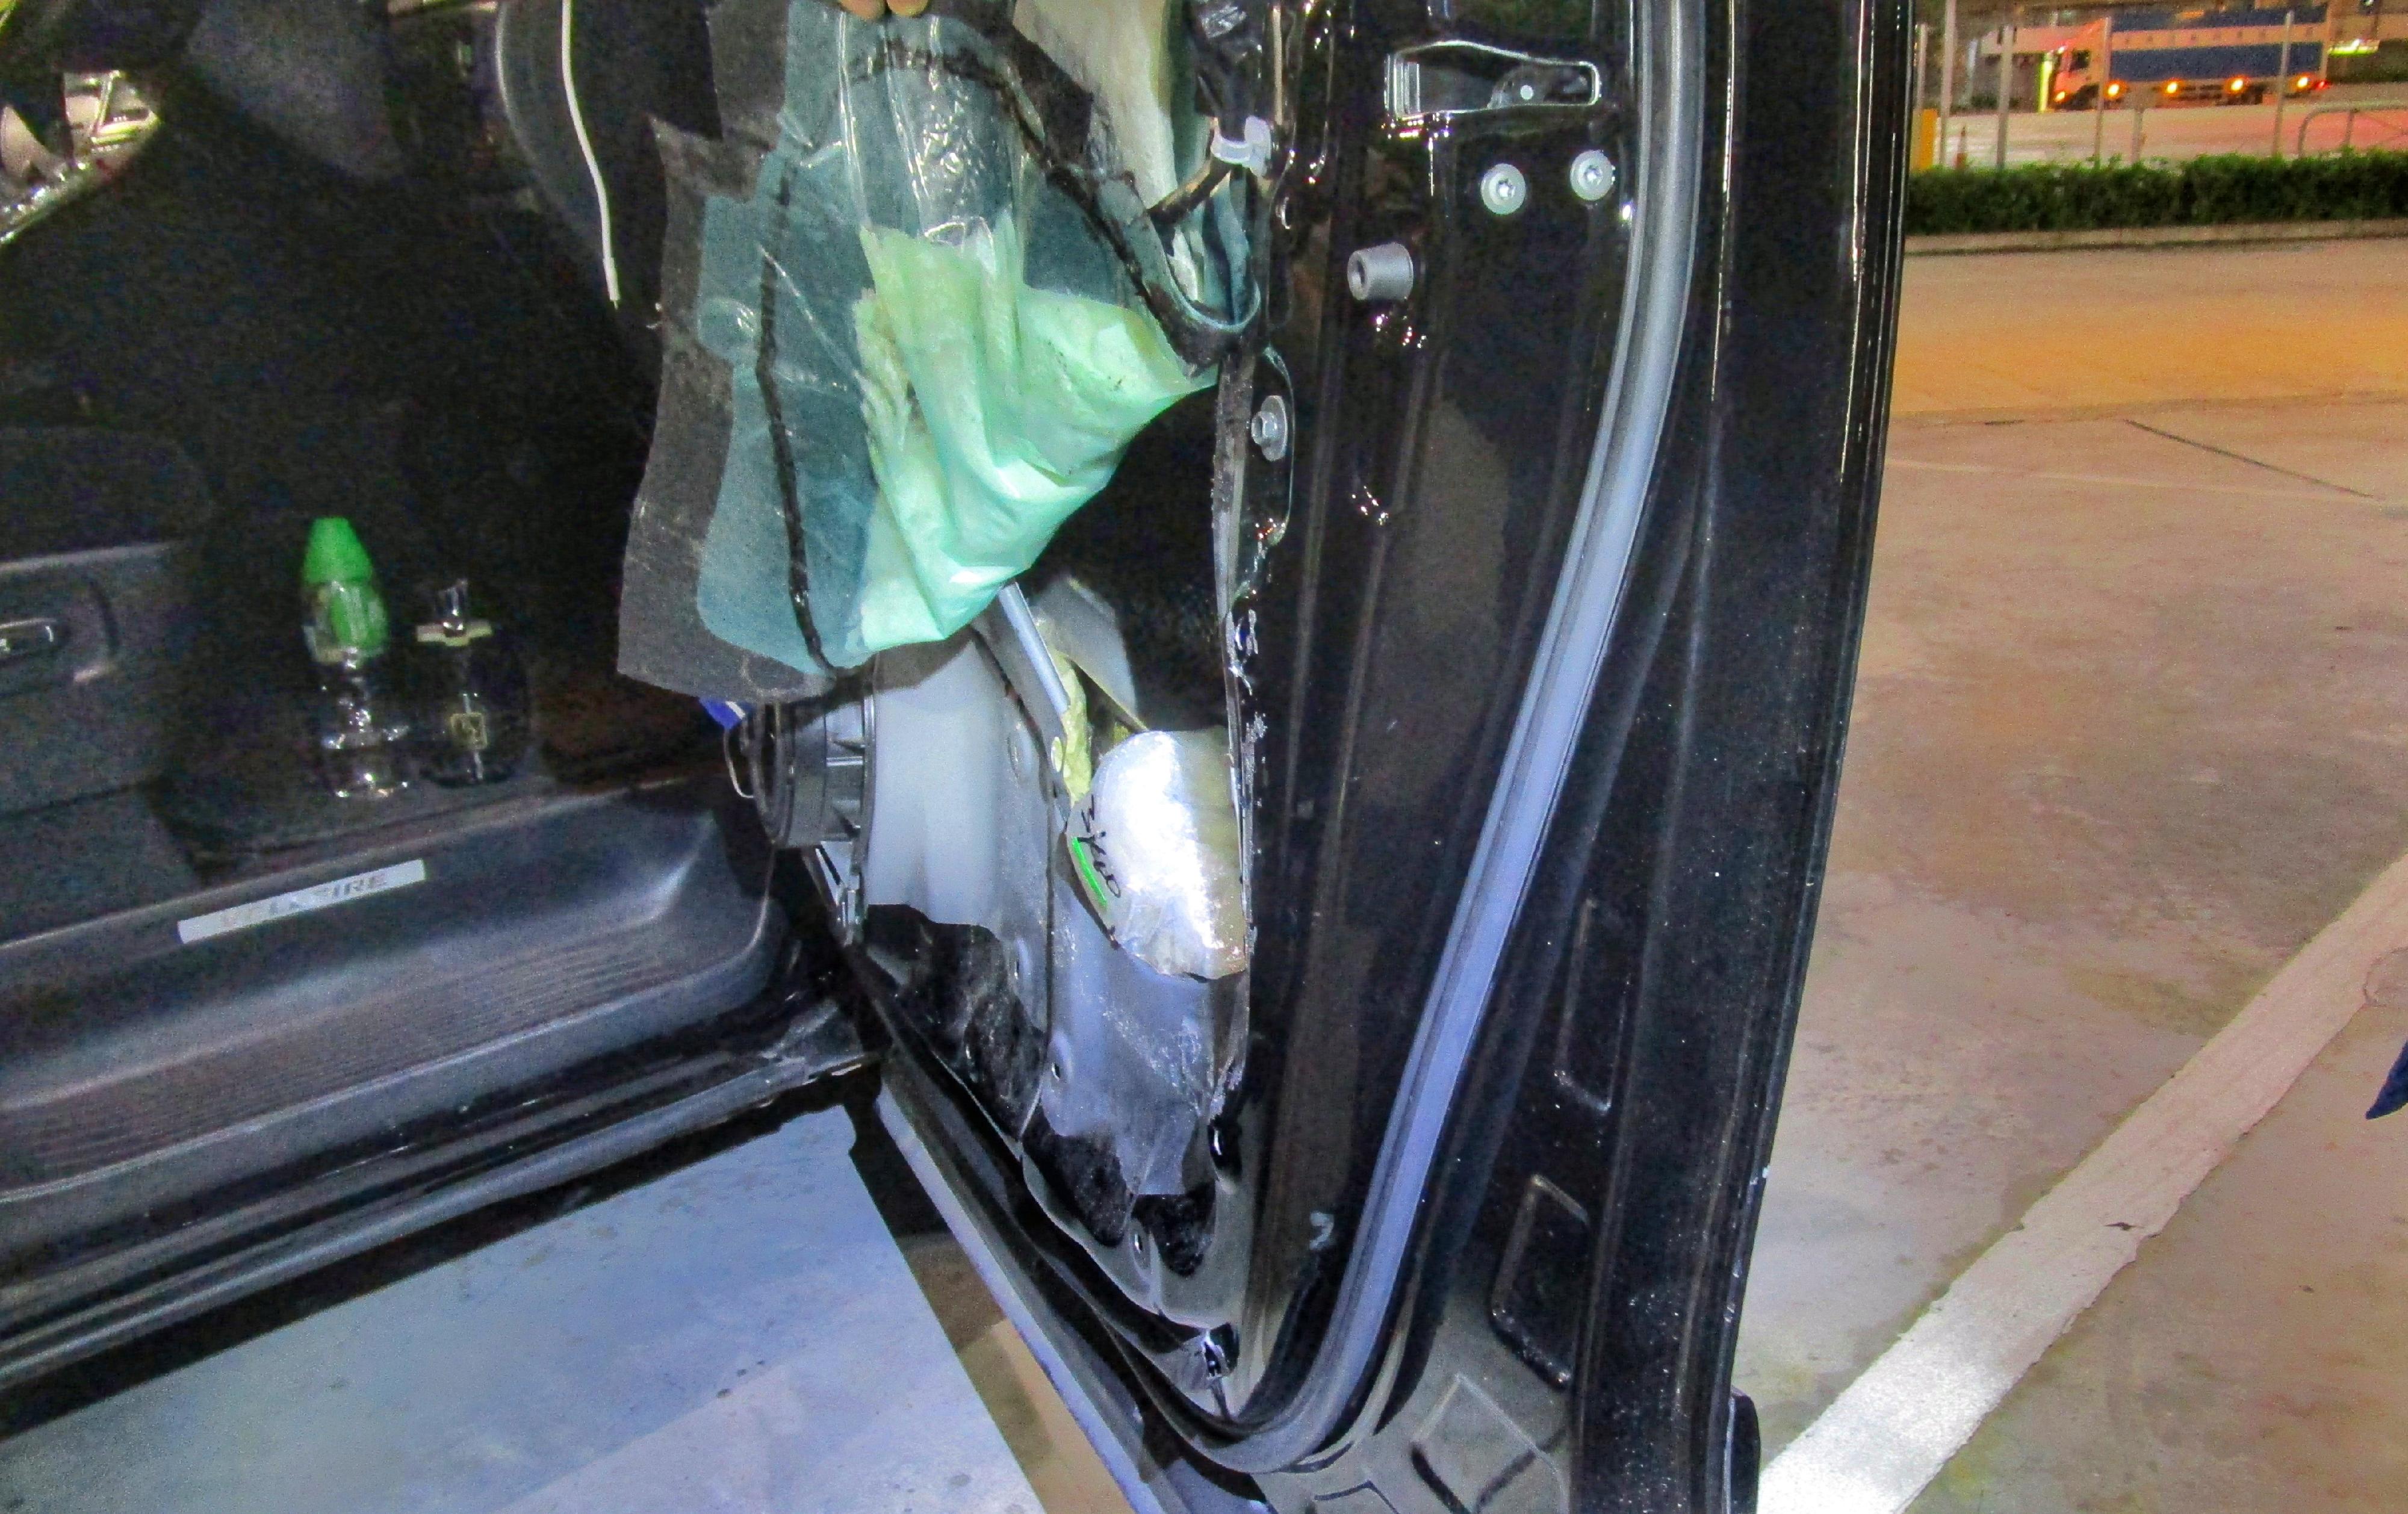 Hong Kong Customs yesterday (October 12) detected a suspected smuggling case involving a private car at the Heung Yuen Wai Control Point and seized about 12 kilograms of suspected smuggled bird's nests with an estimated market value of about $700,000. Photo shows the suspected smuggled bird's nests found in the vehicle's door.